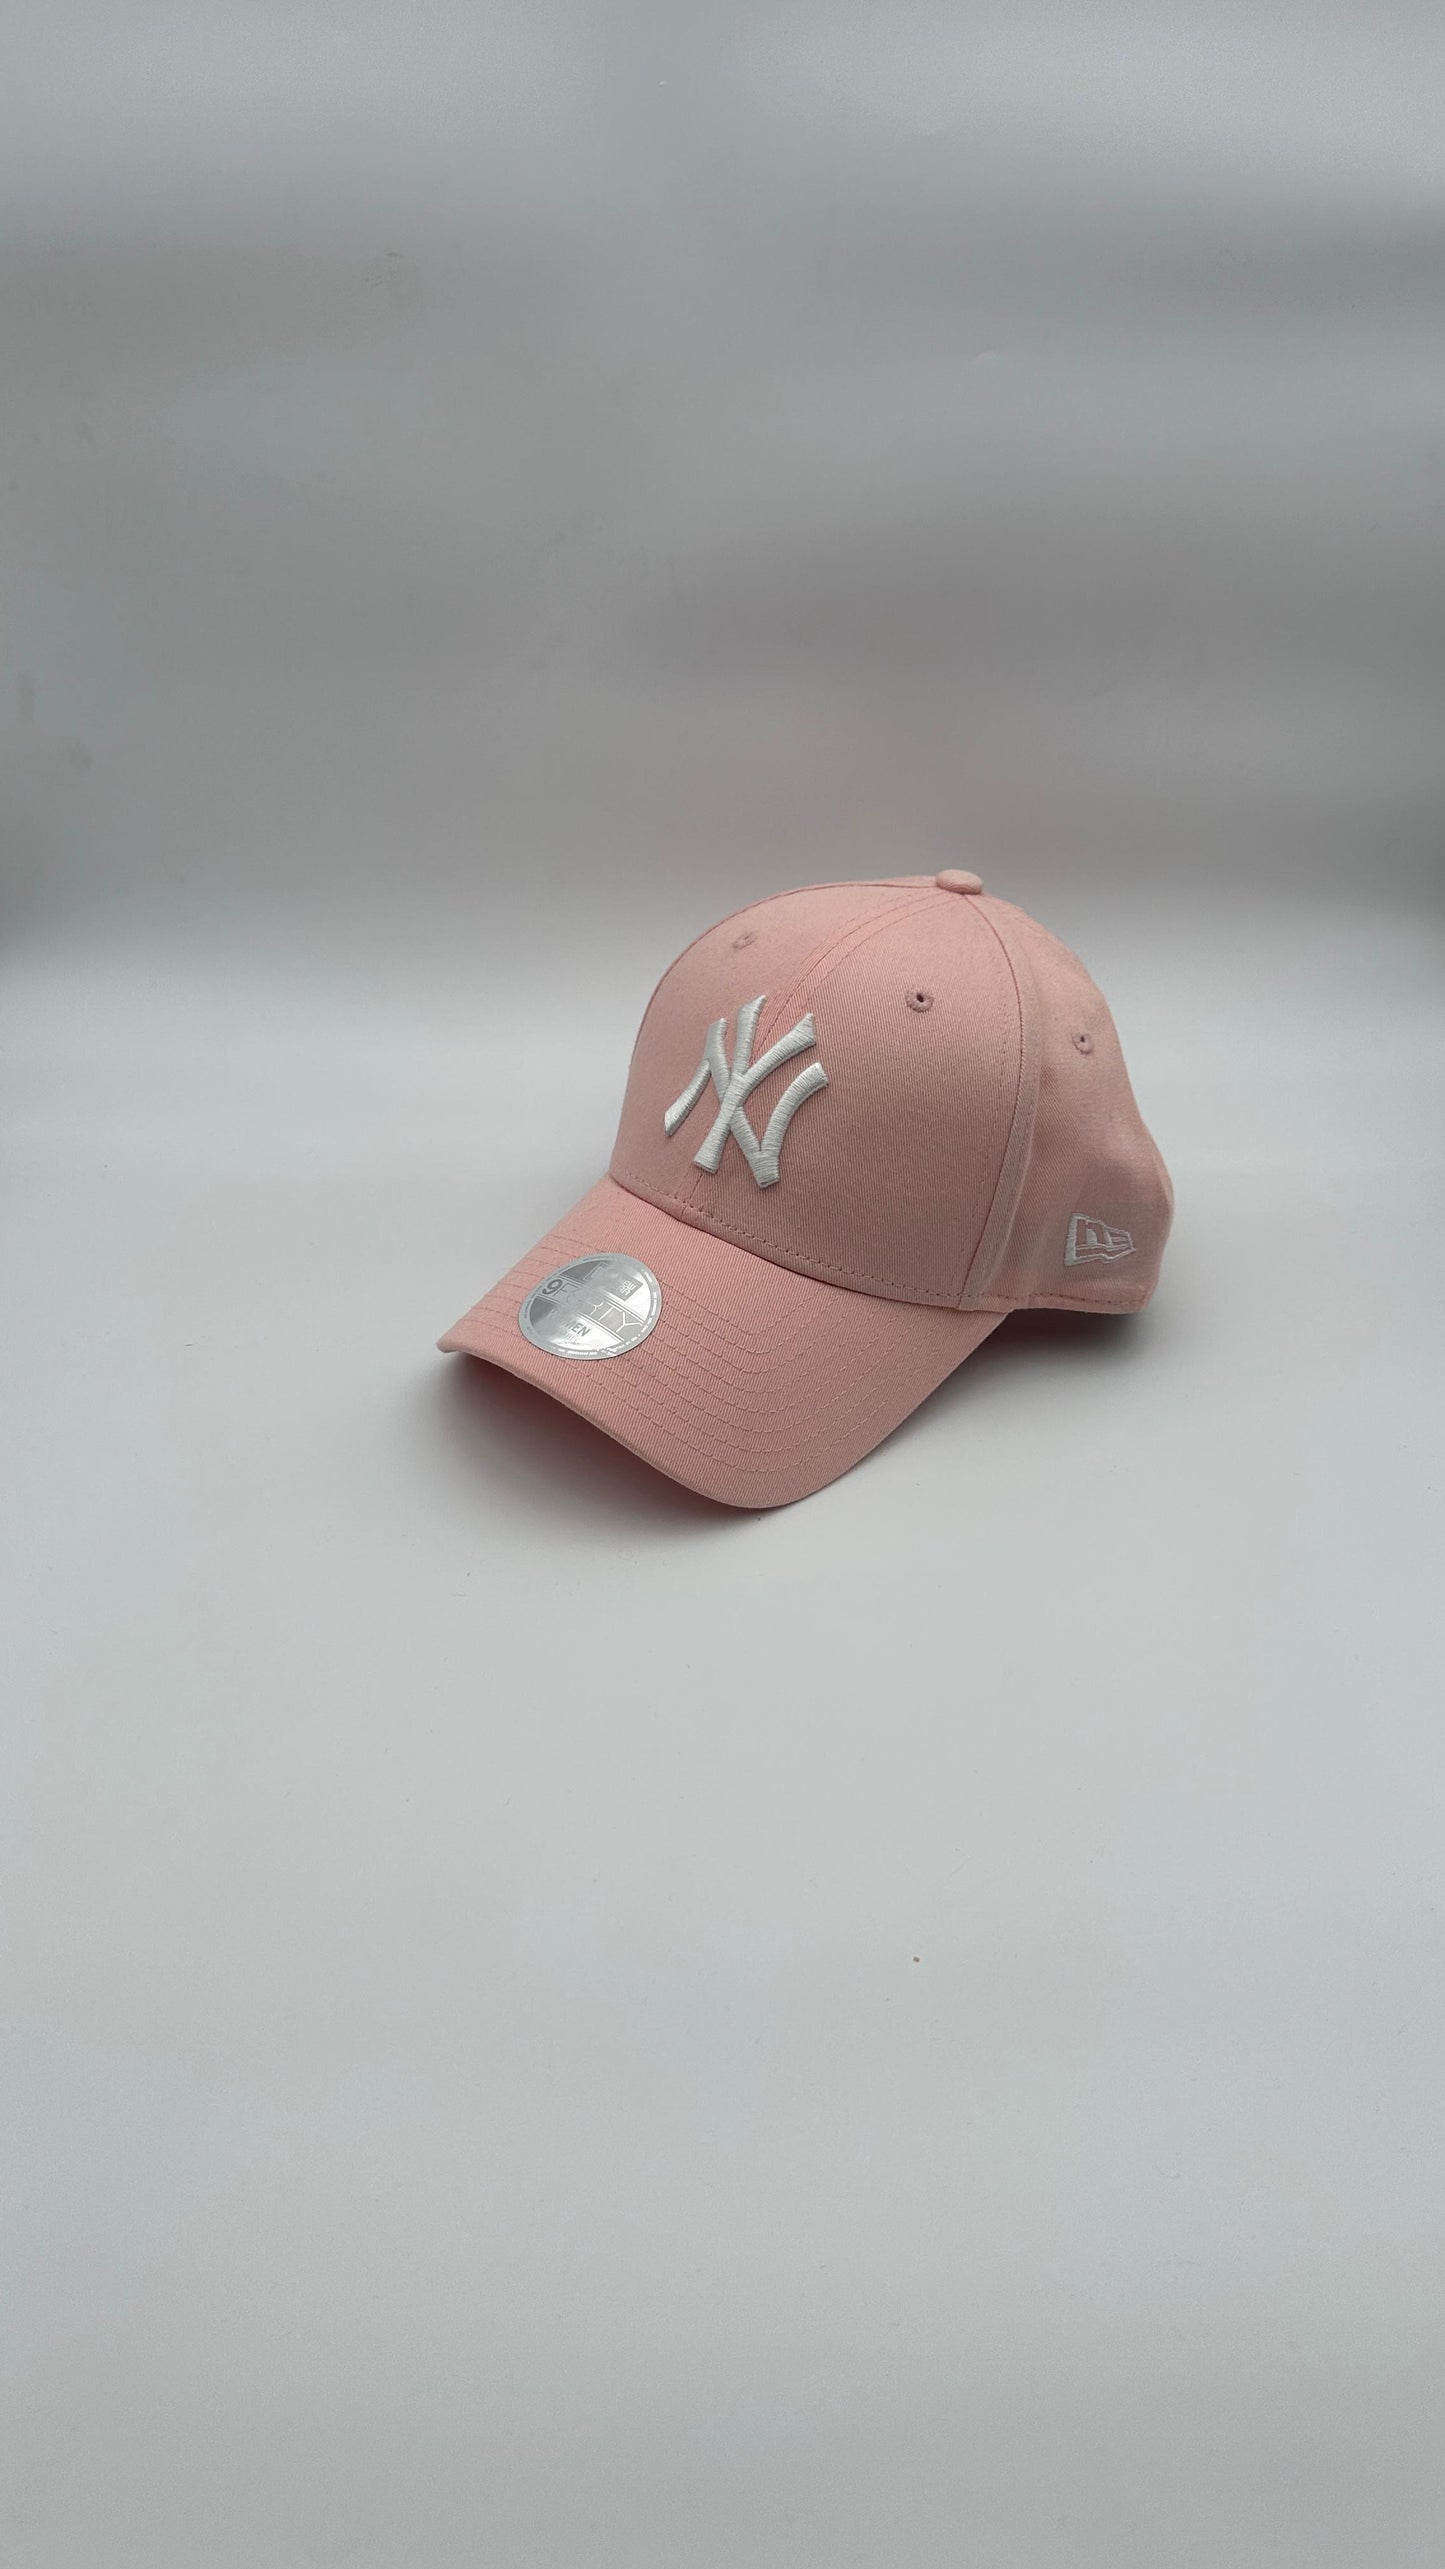 NY NEW ERA “pink” - Butterfly Sneakers